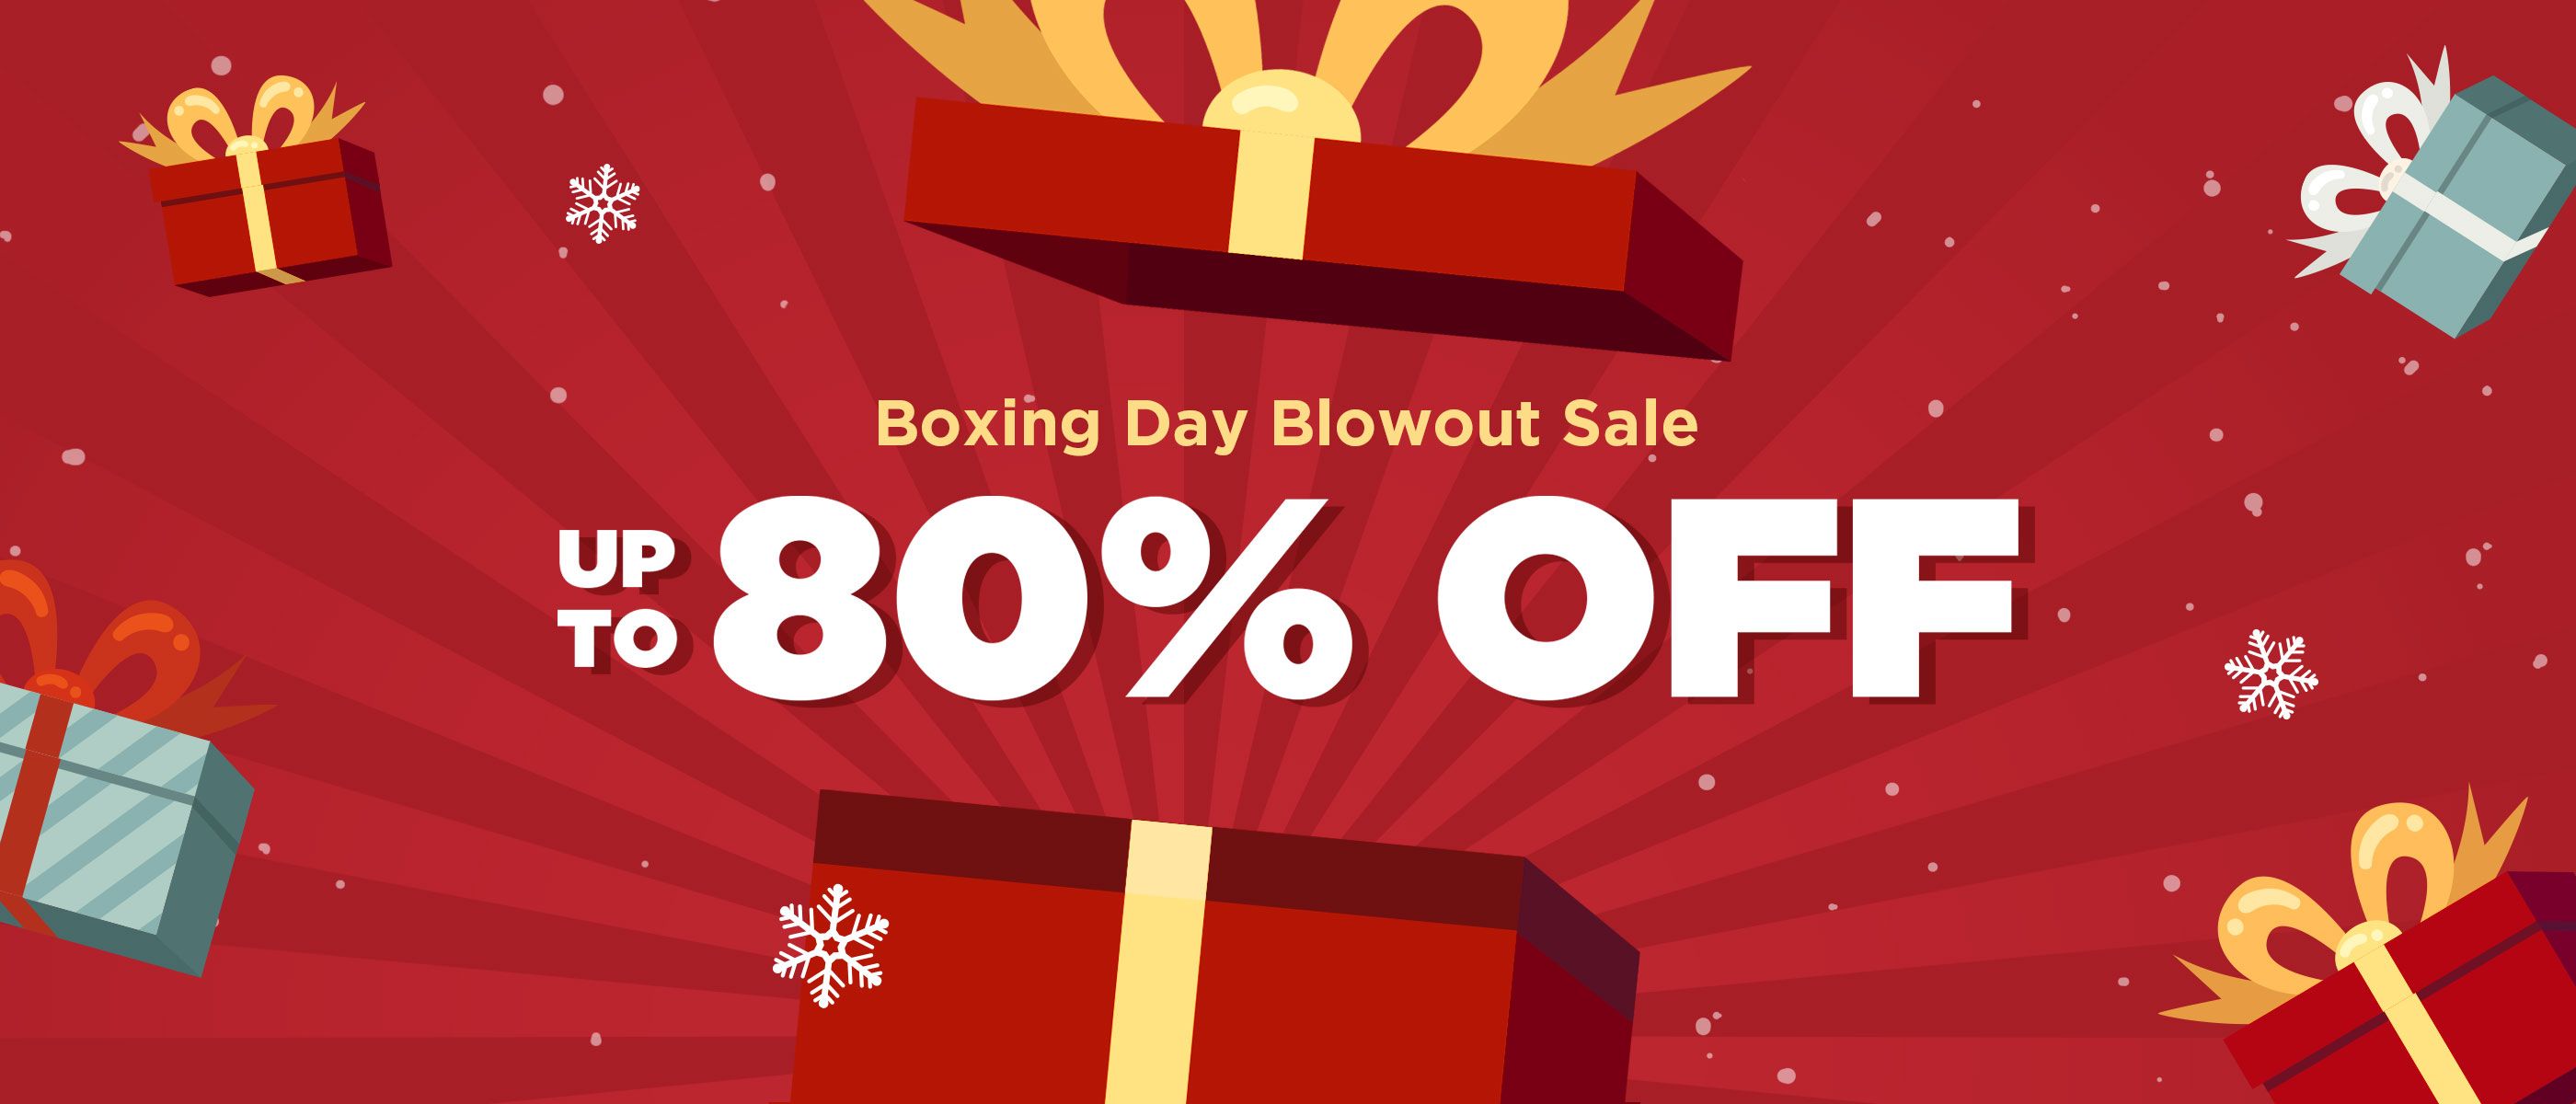 This image says eur-Boxing Day _ PC主会场